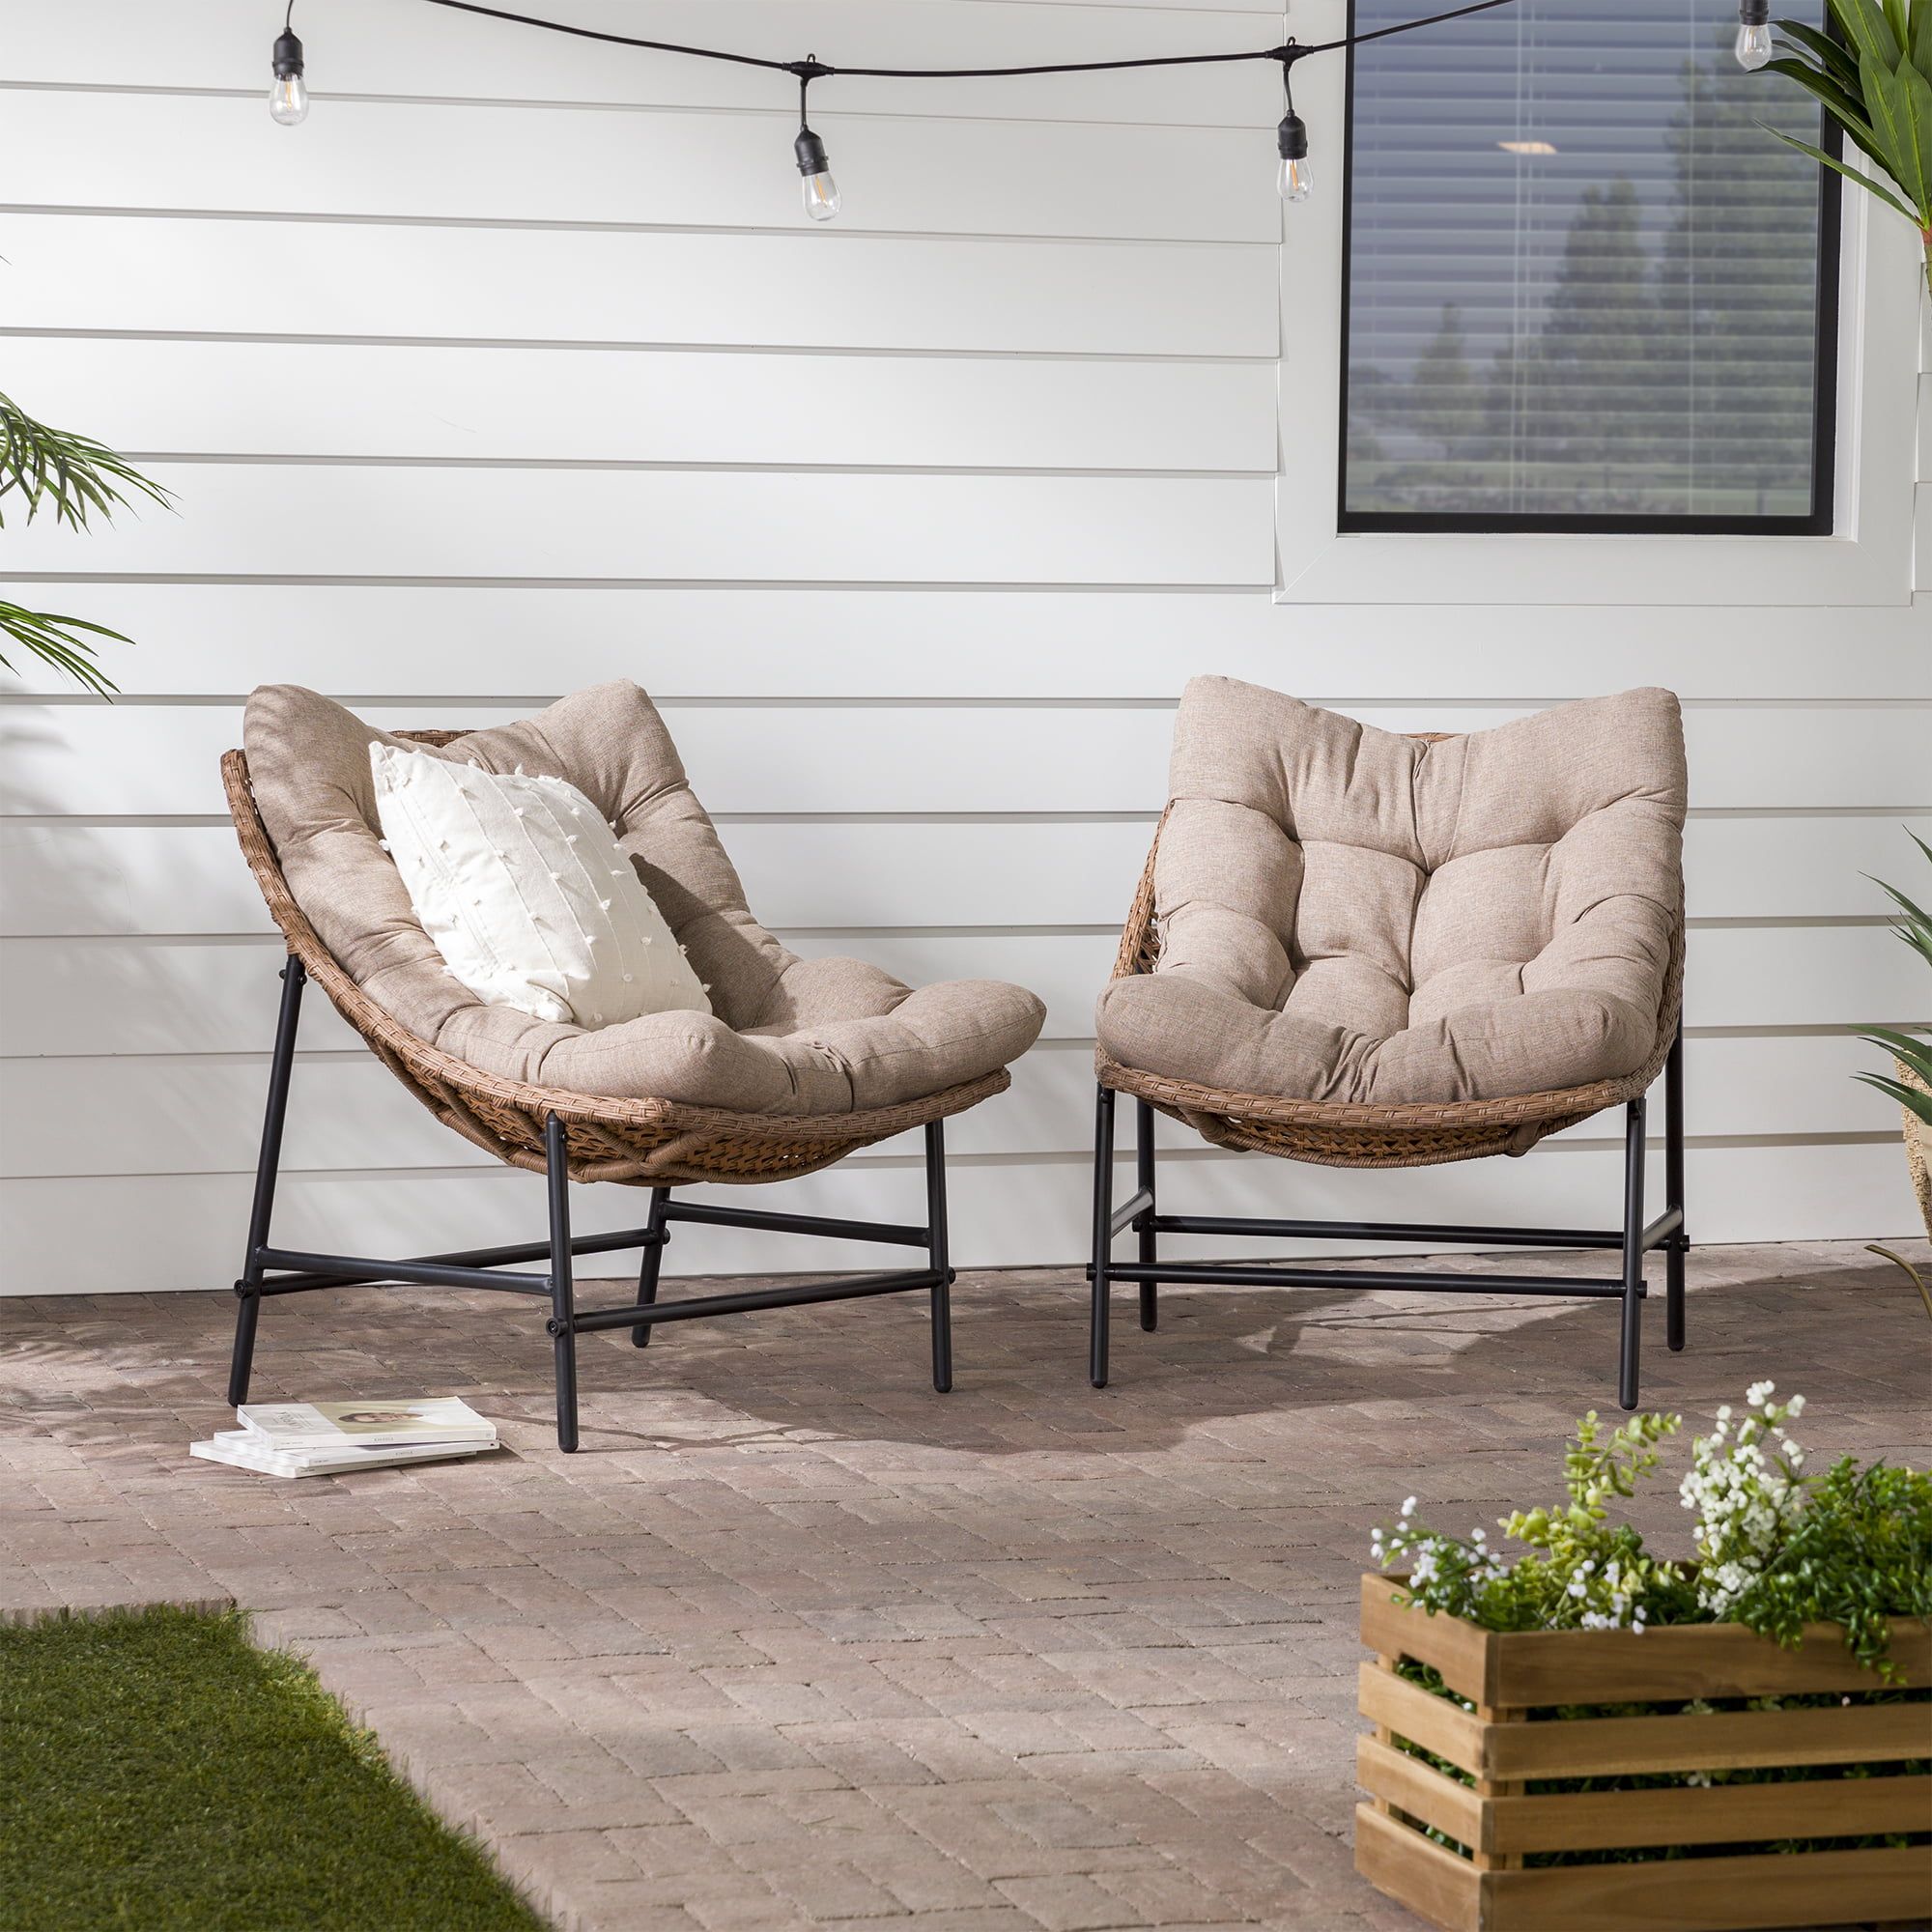 Top Patio Chairs for Maximum Comfort and
Style